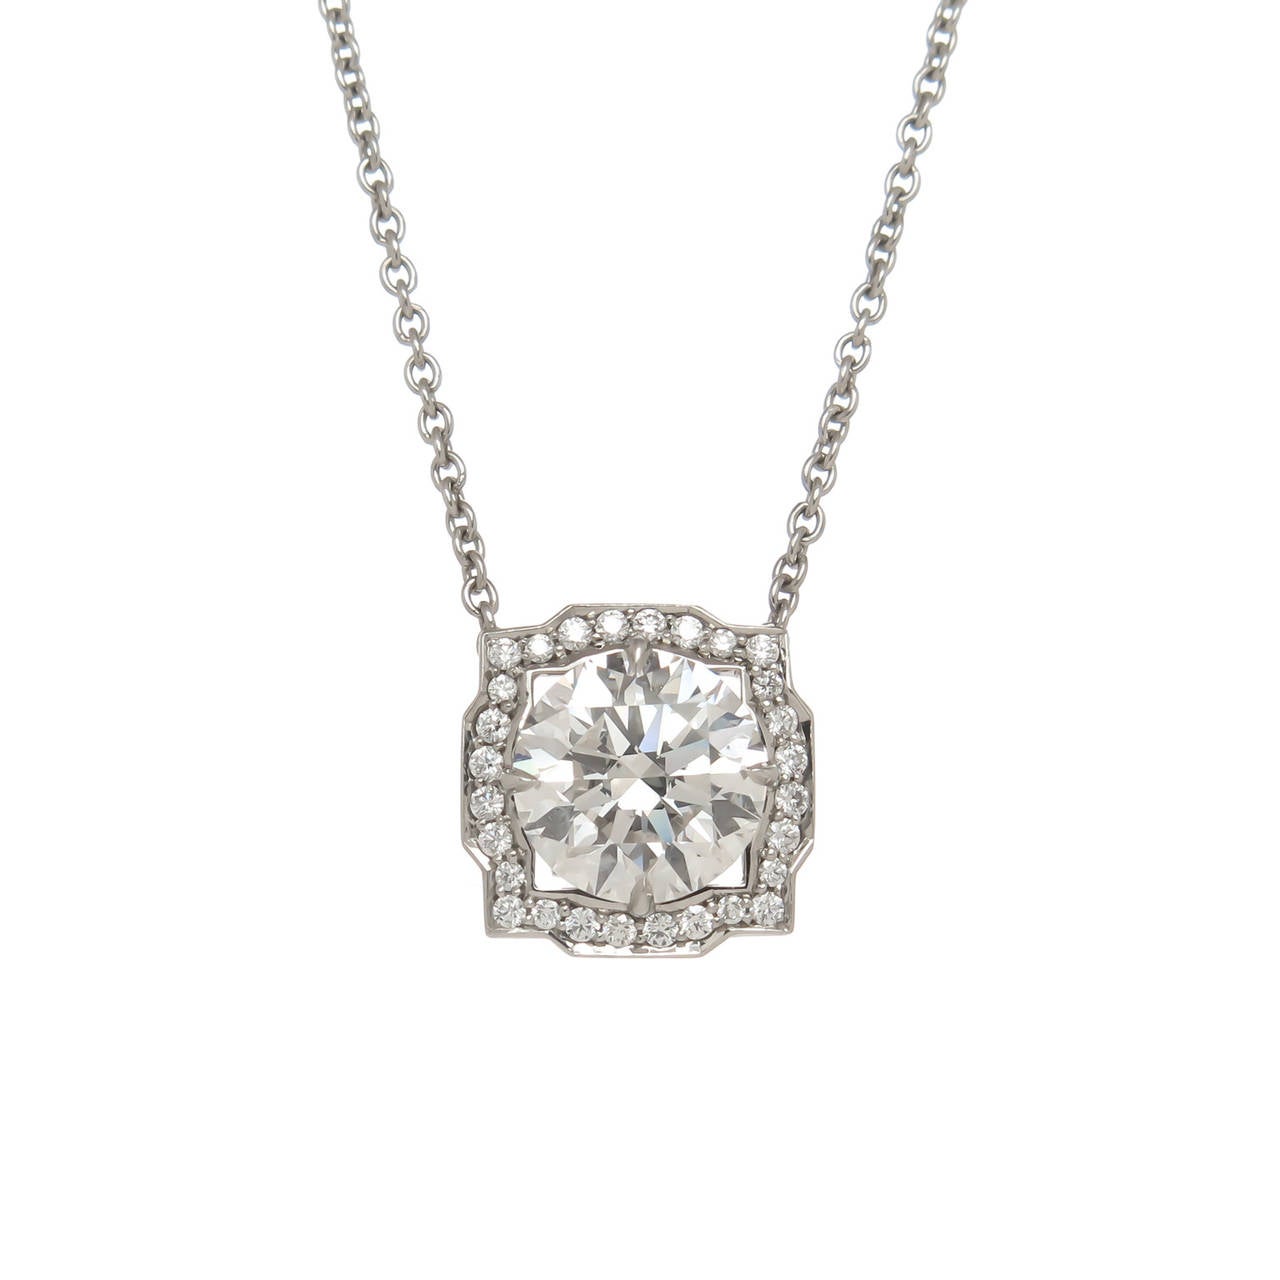 Circa 2013 Harry Winston Belle Collection Diamond Solitaire Platinum pendant necklace,  center stone weighing 1.52 Carat and GIA certified as F in Color and VS2 in Clarity, further surrounded by .13 carats round brilliant cuts. Suspended from a